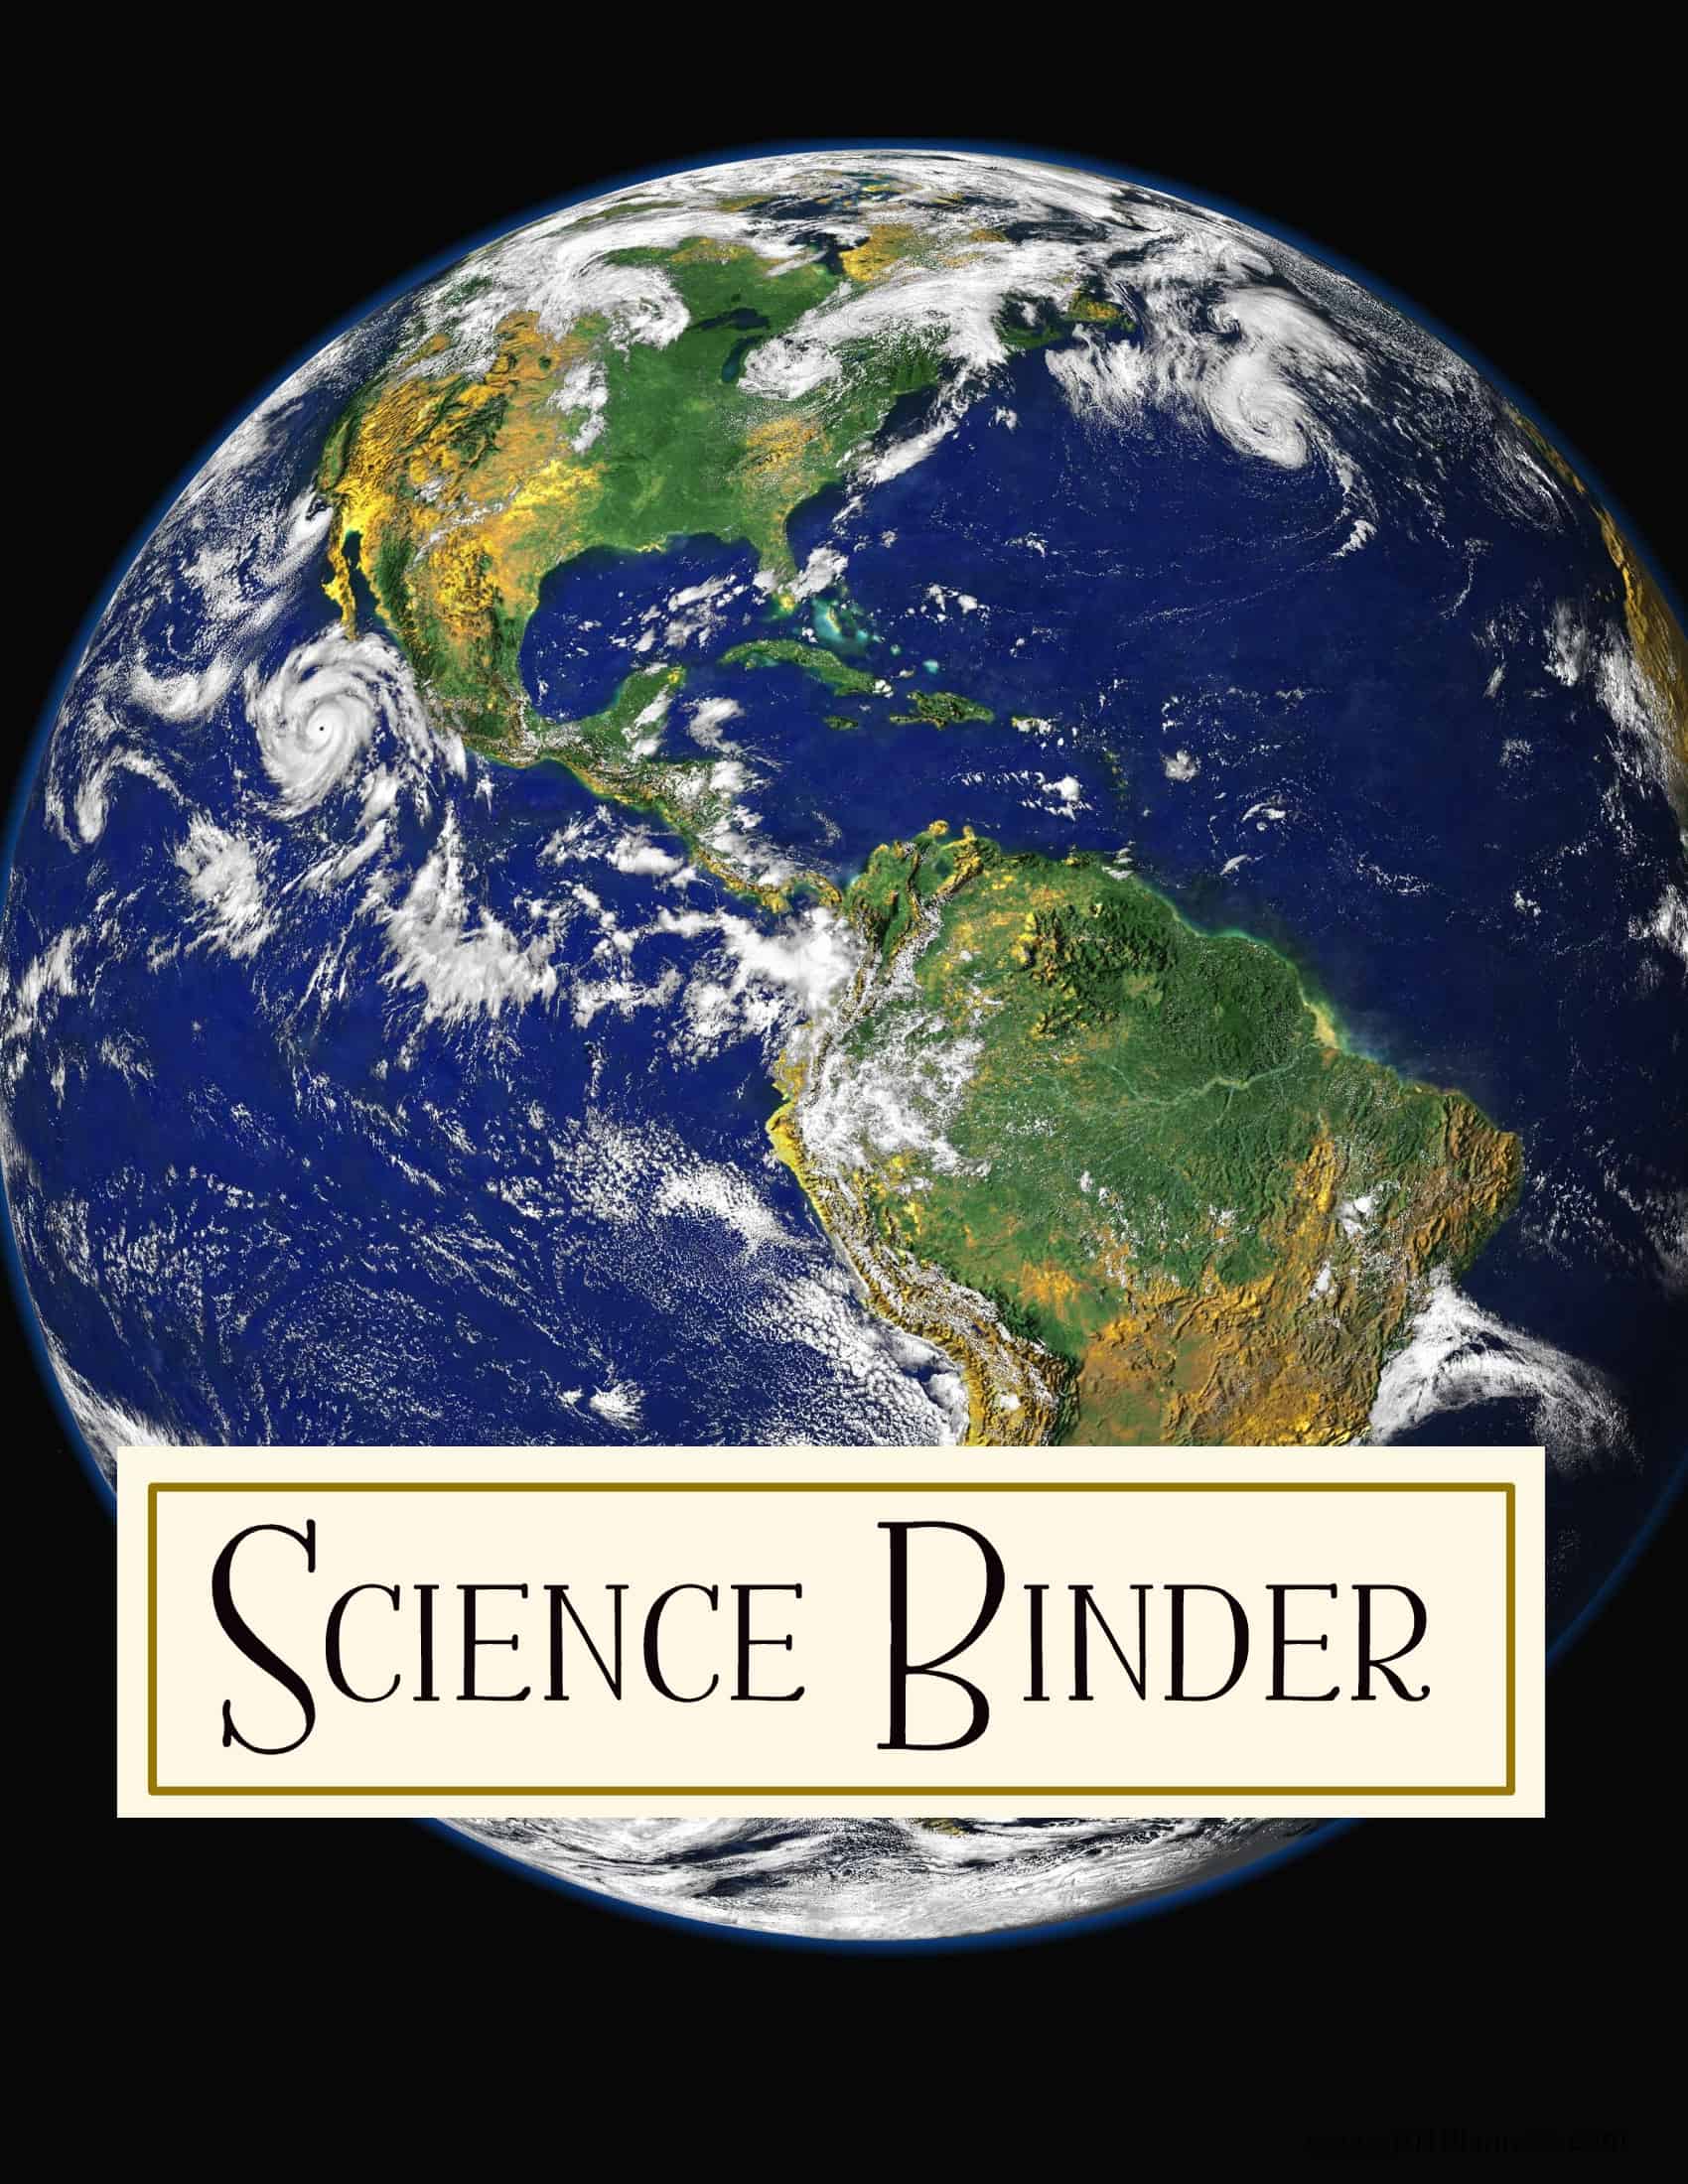 Free Science Binder Cover Customize Online & Print at Home